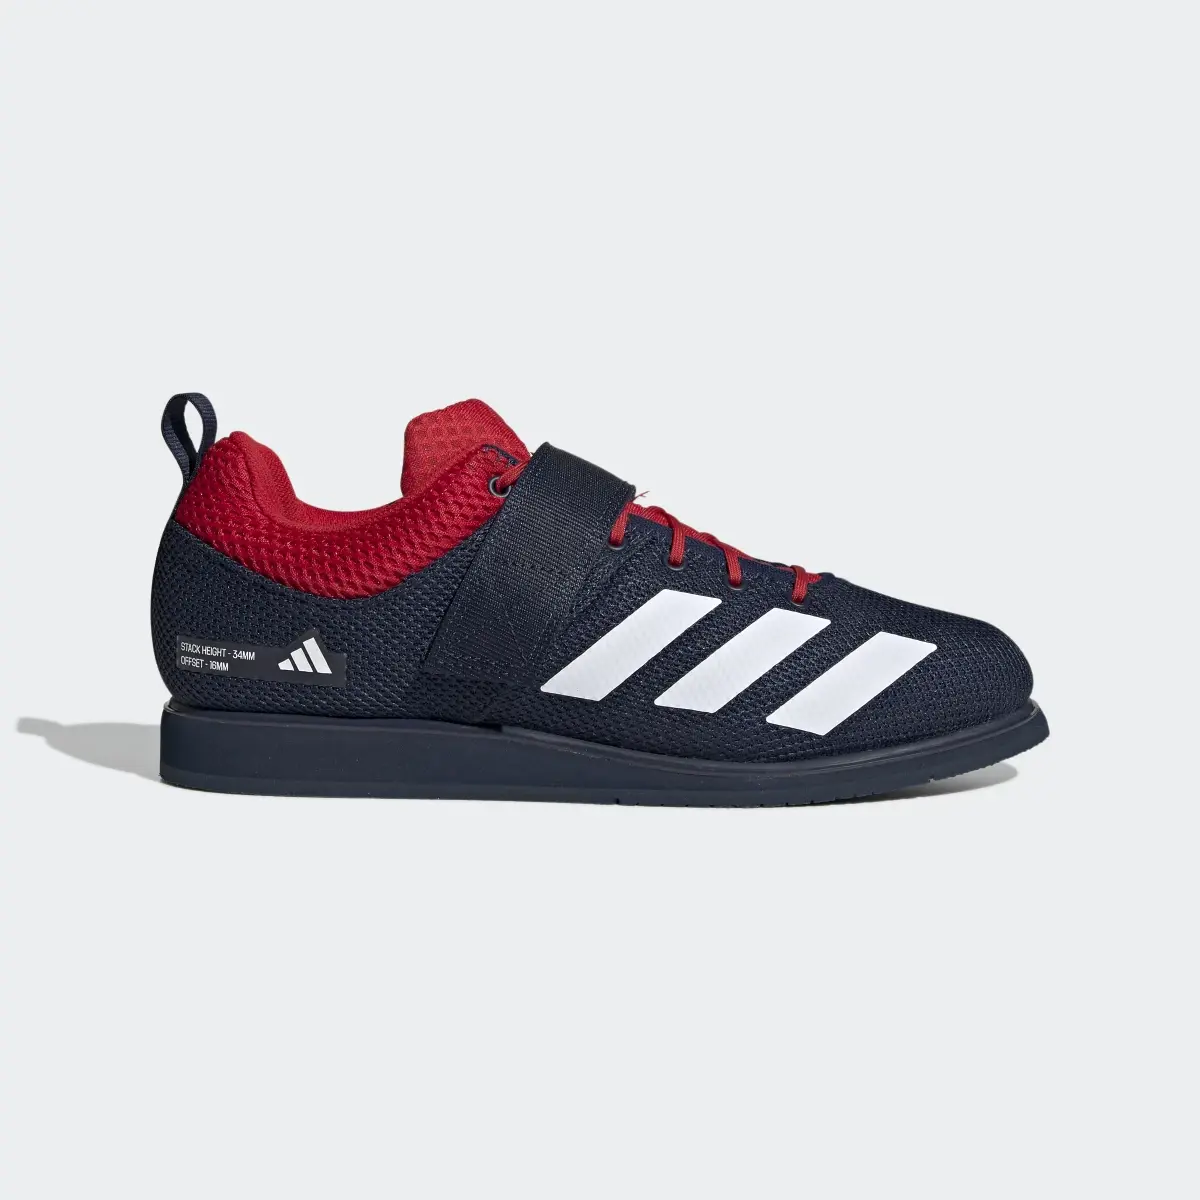 Adidas Powerlift 5 Weightlifting Shoes. 2